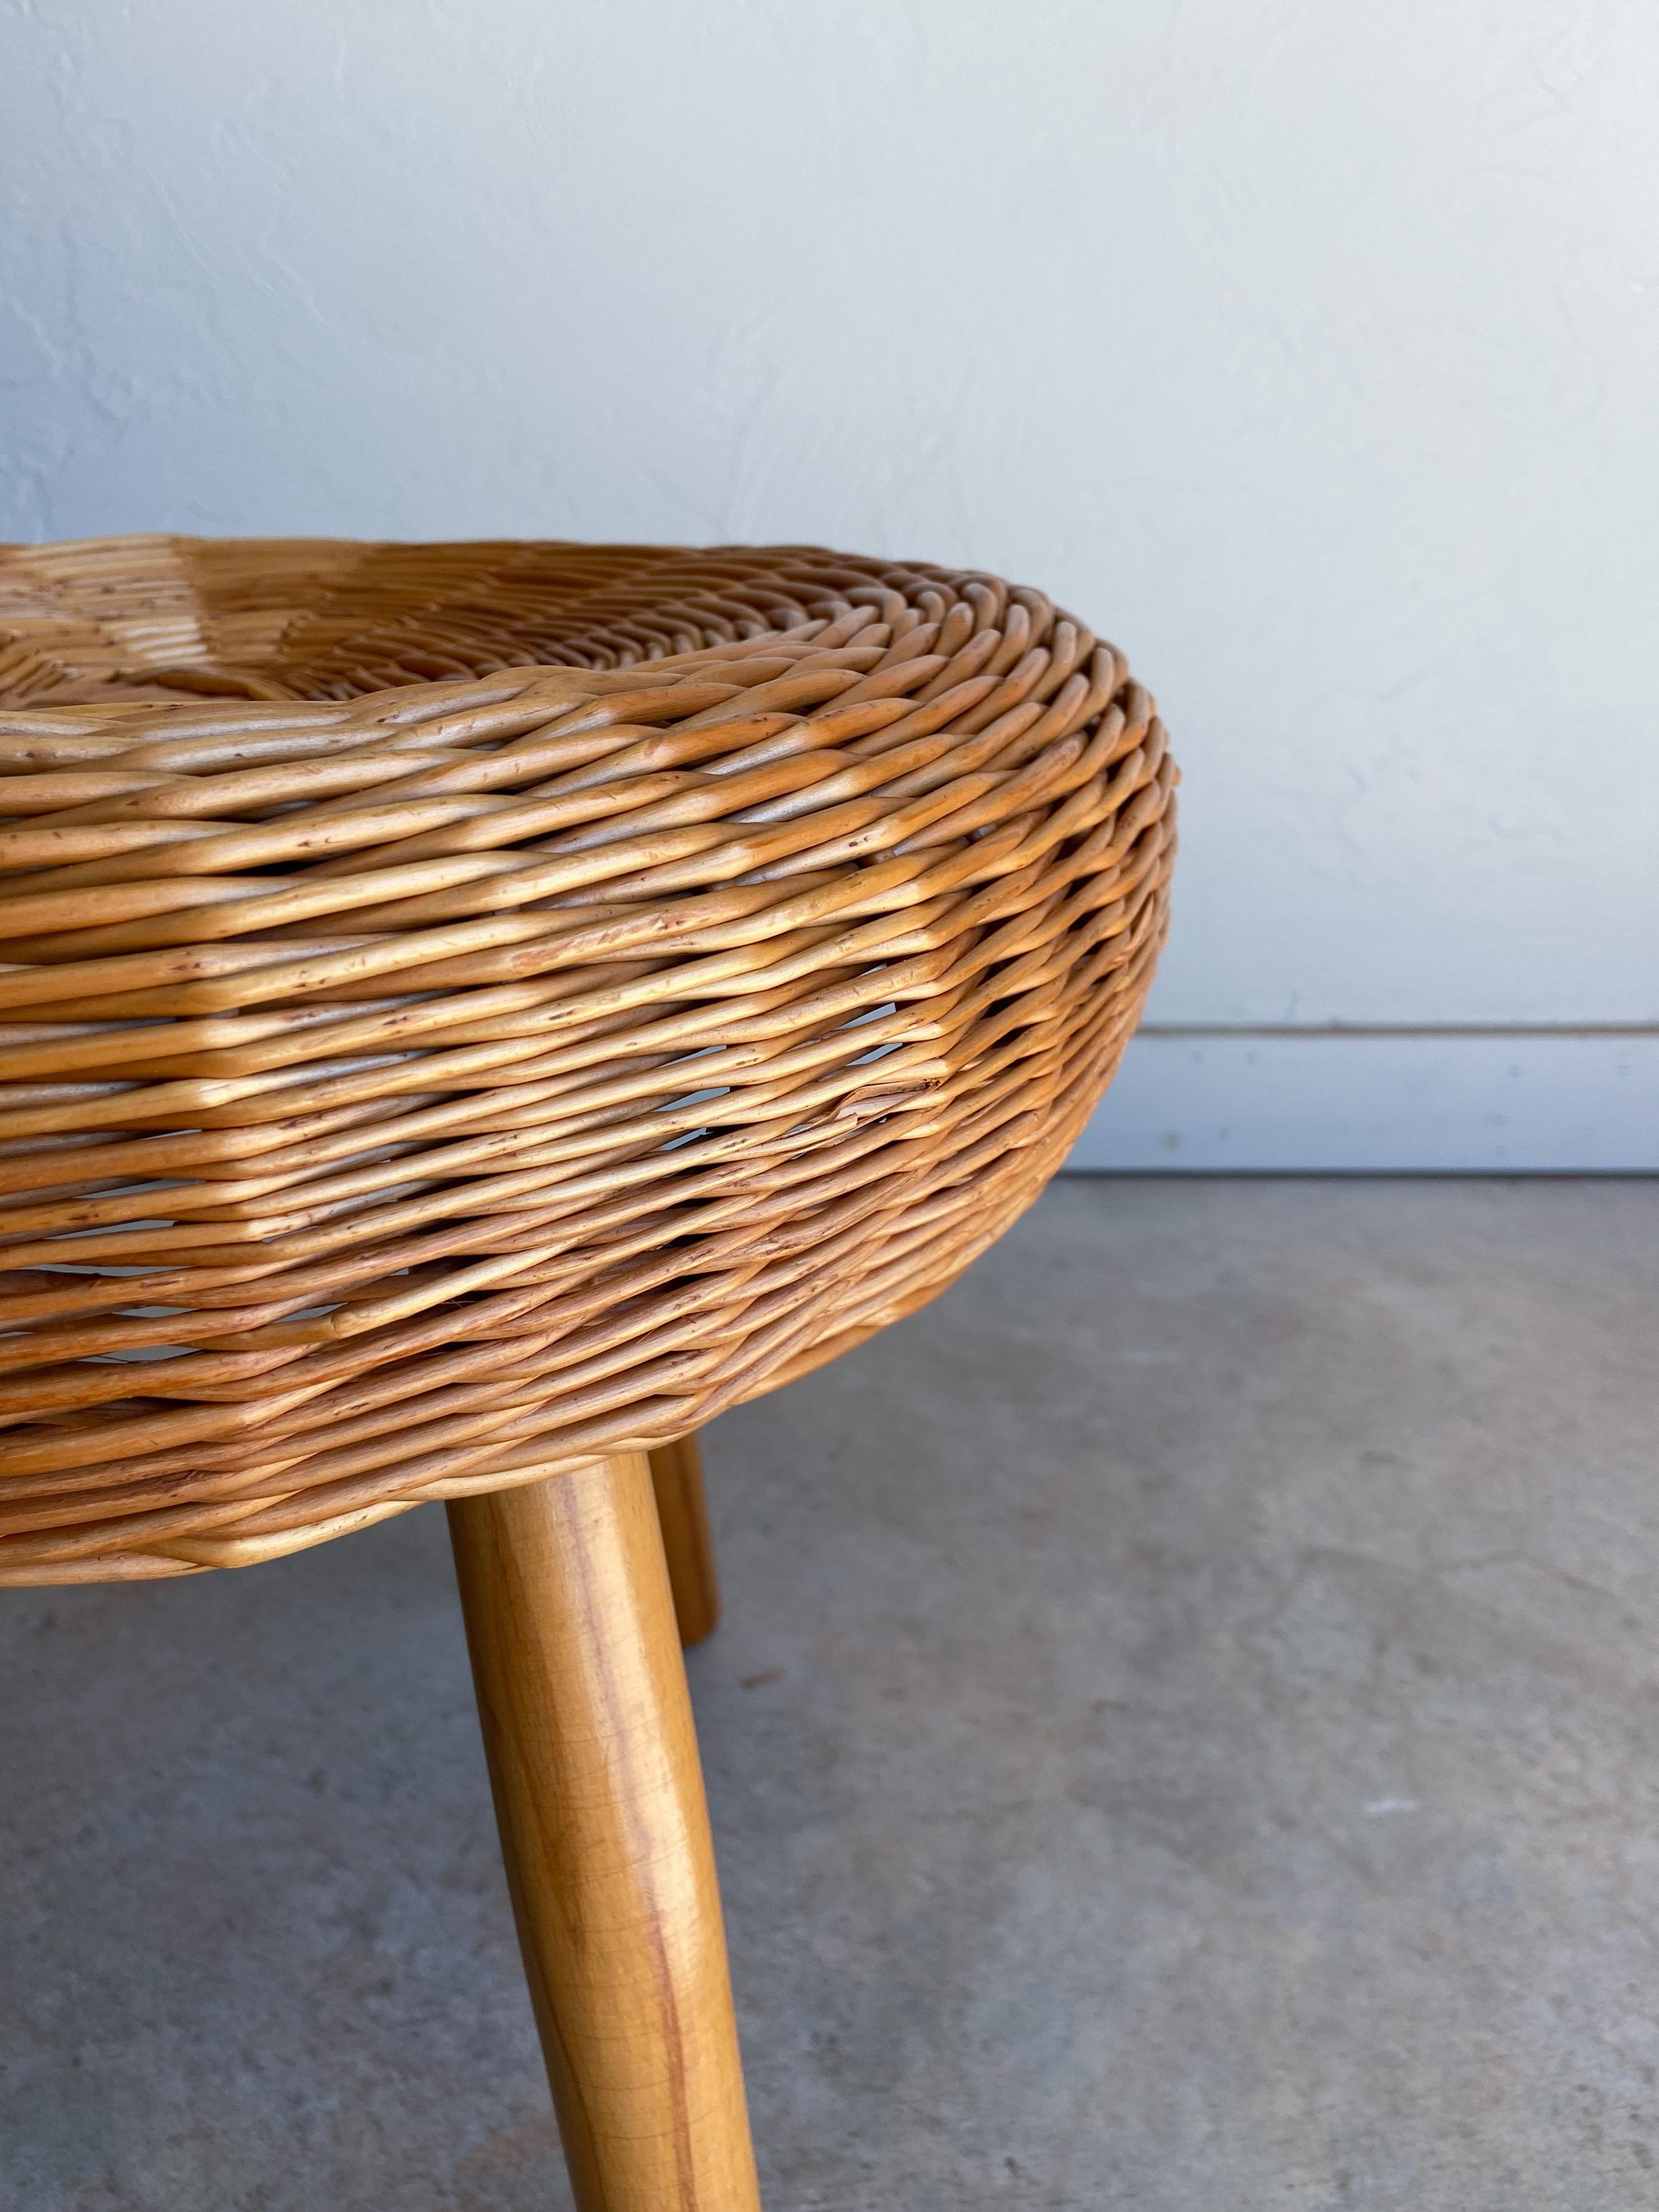 Mid-20th Century Large Rattan and Wood Stool Attributed to Tony Paul, 1960 For Sale